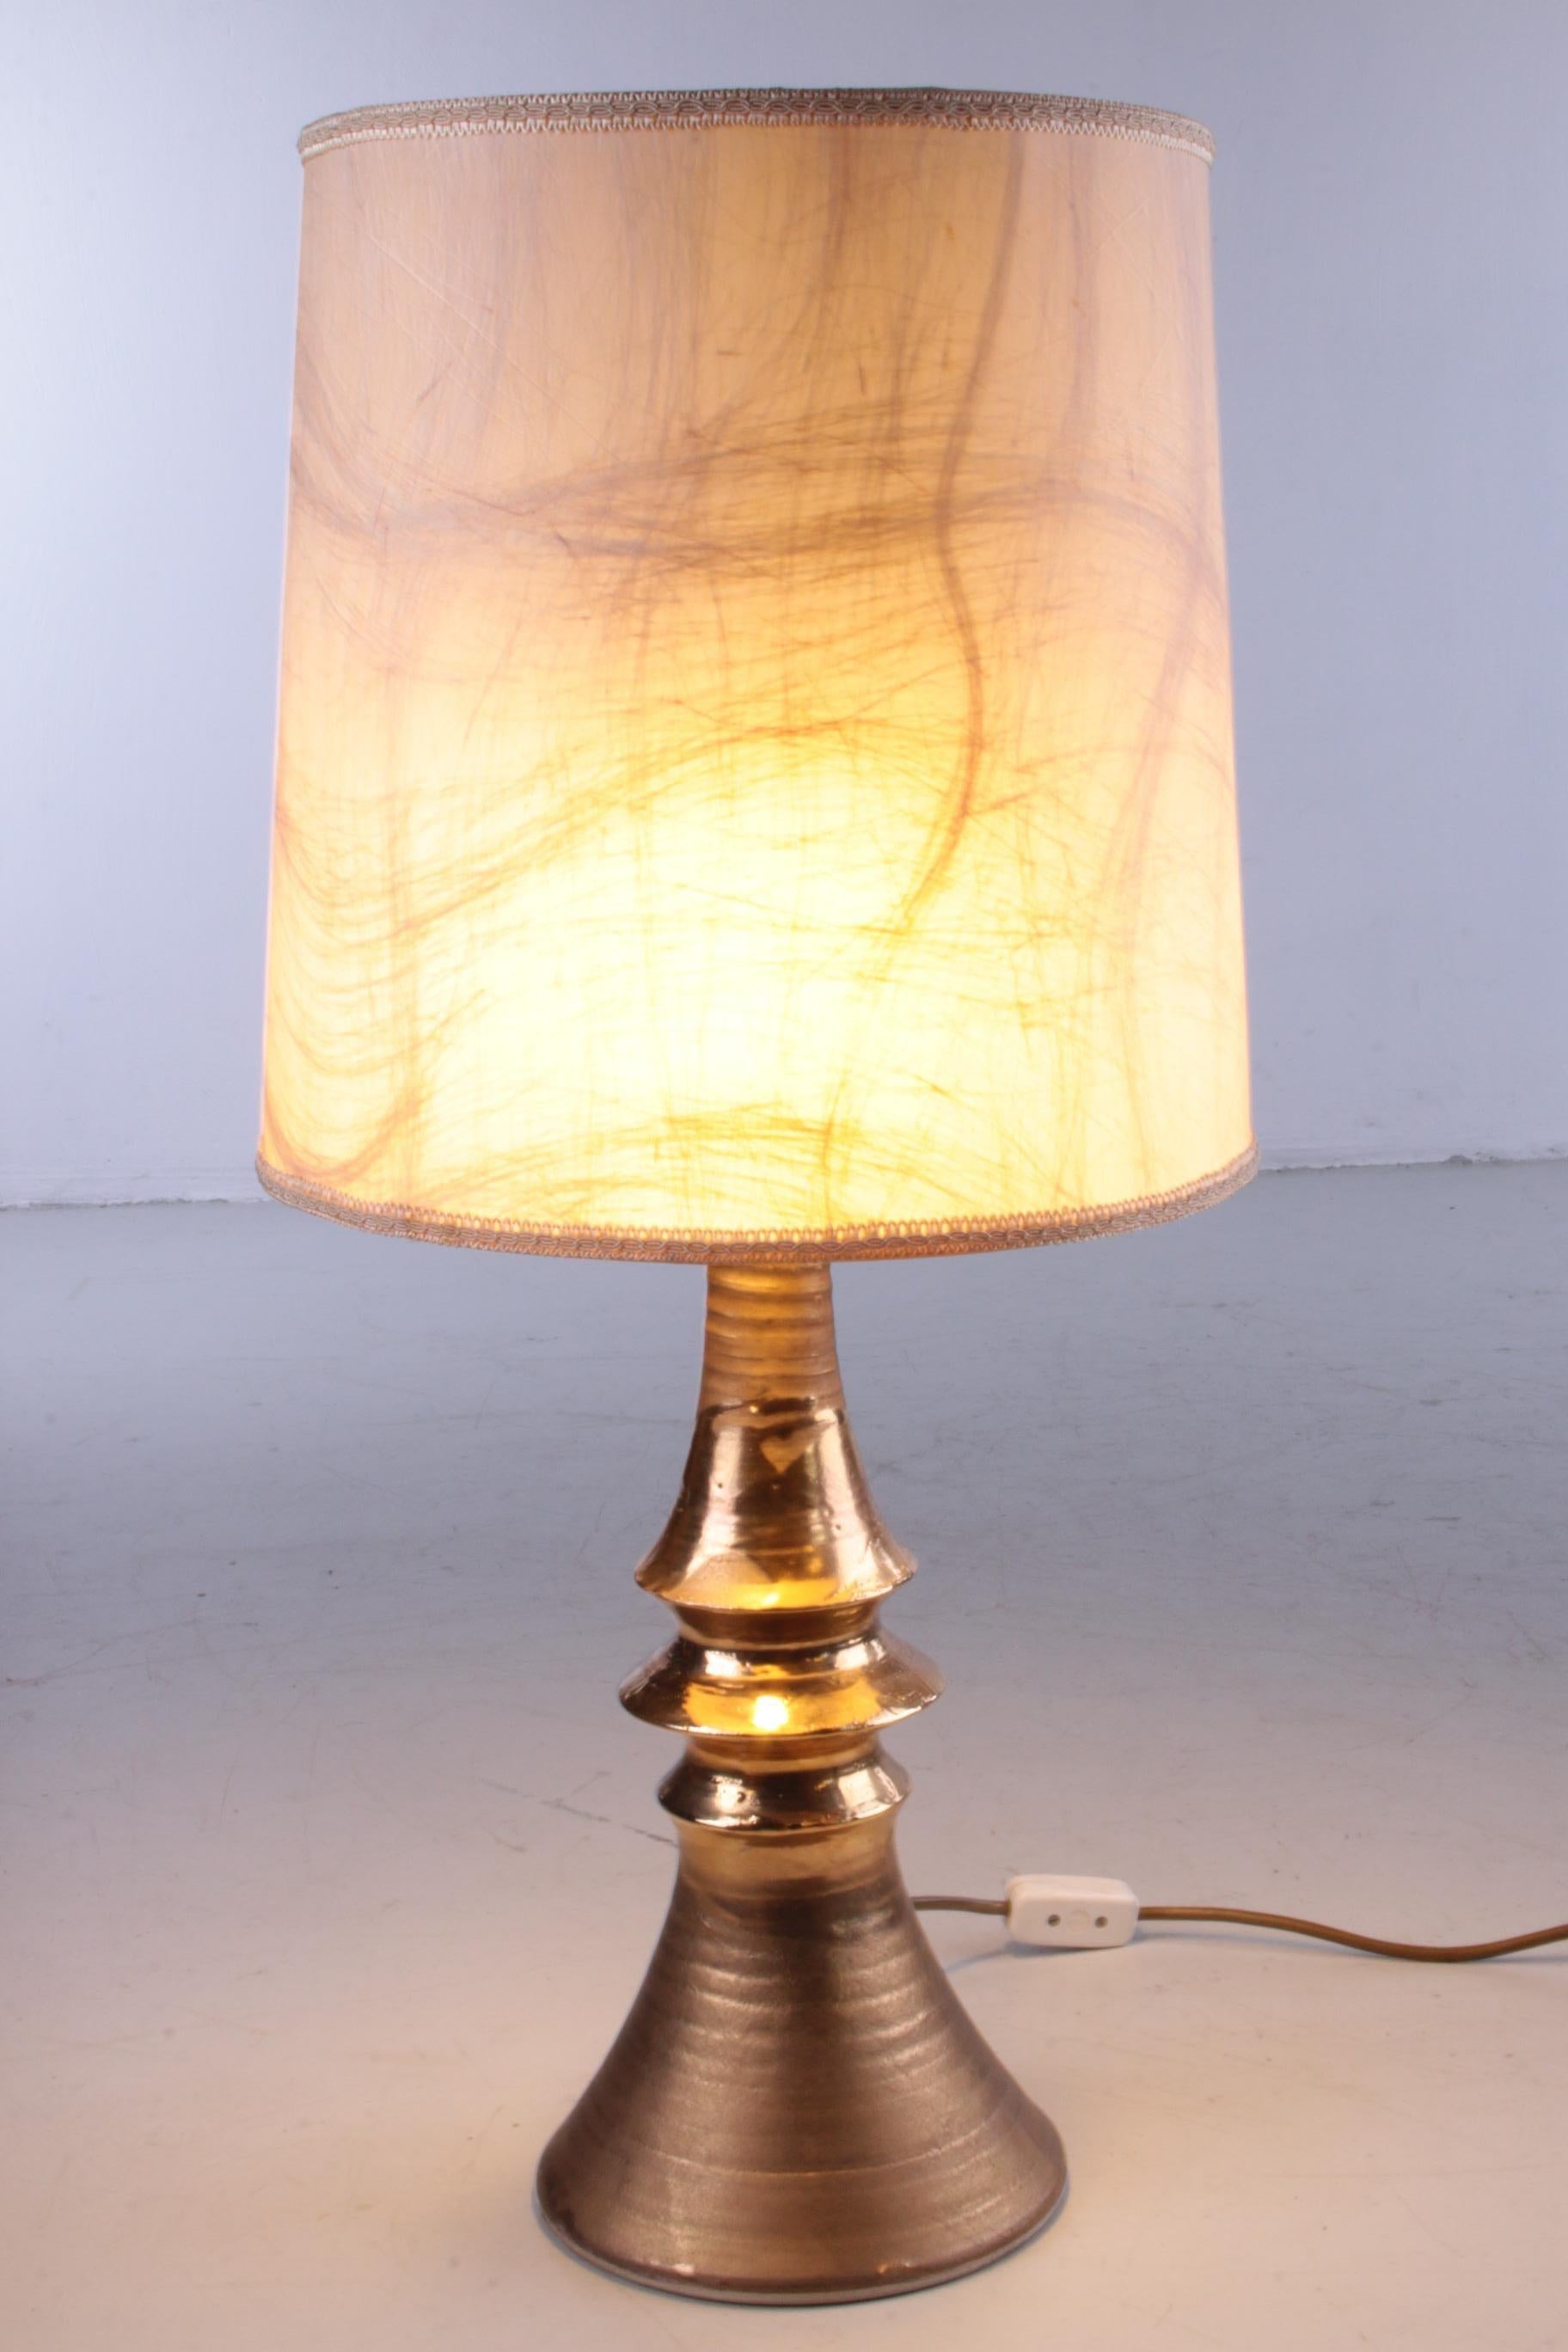 This is a beautiful golden table lamp made of ceramics presumably in Germany.

This lamp fits nicely in a modern or Hollywood Regency decor.

There is a switch on the cable with plug

This hood is original, but can of course be replaced by